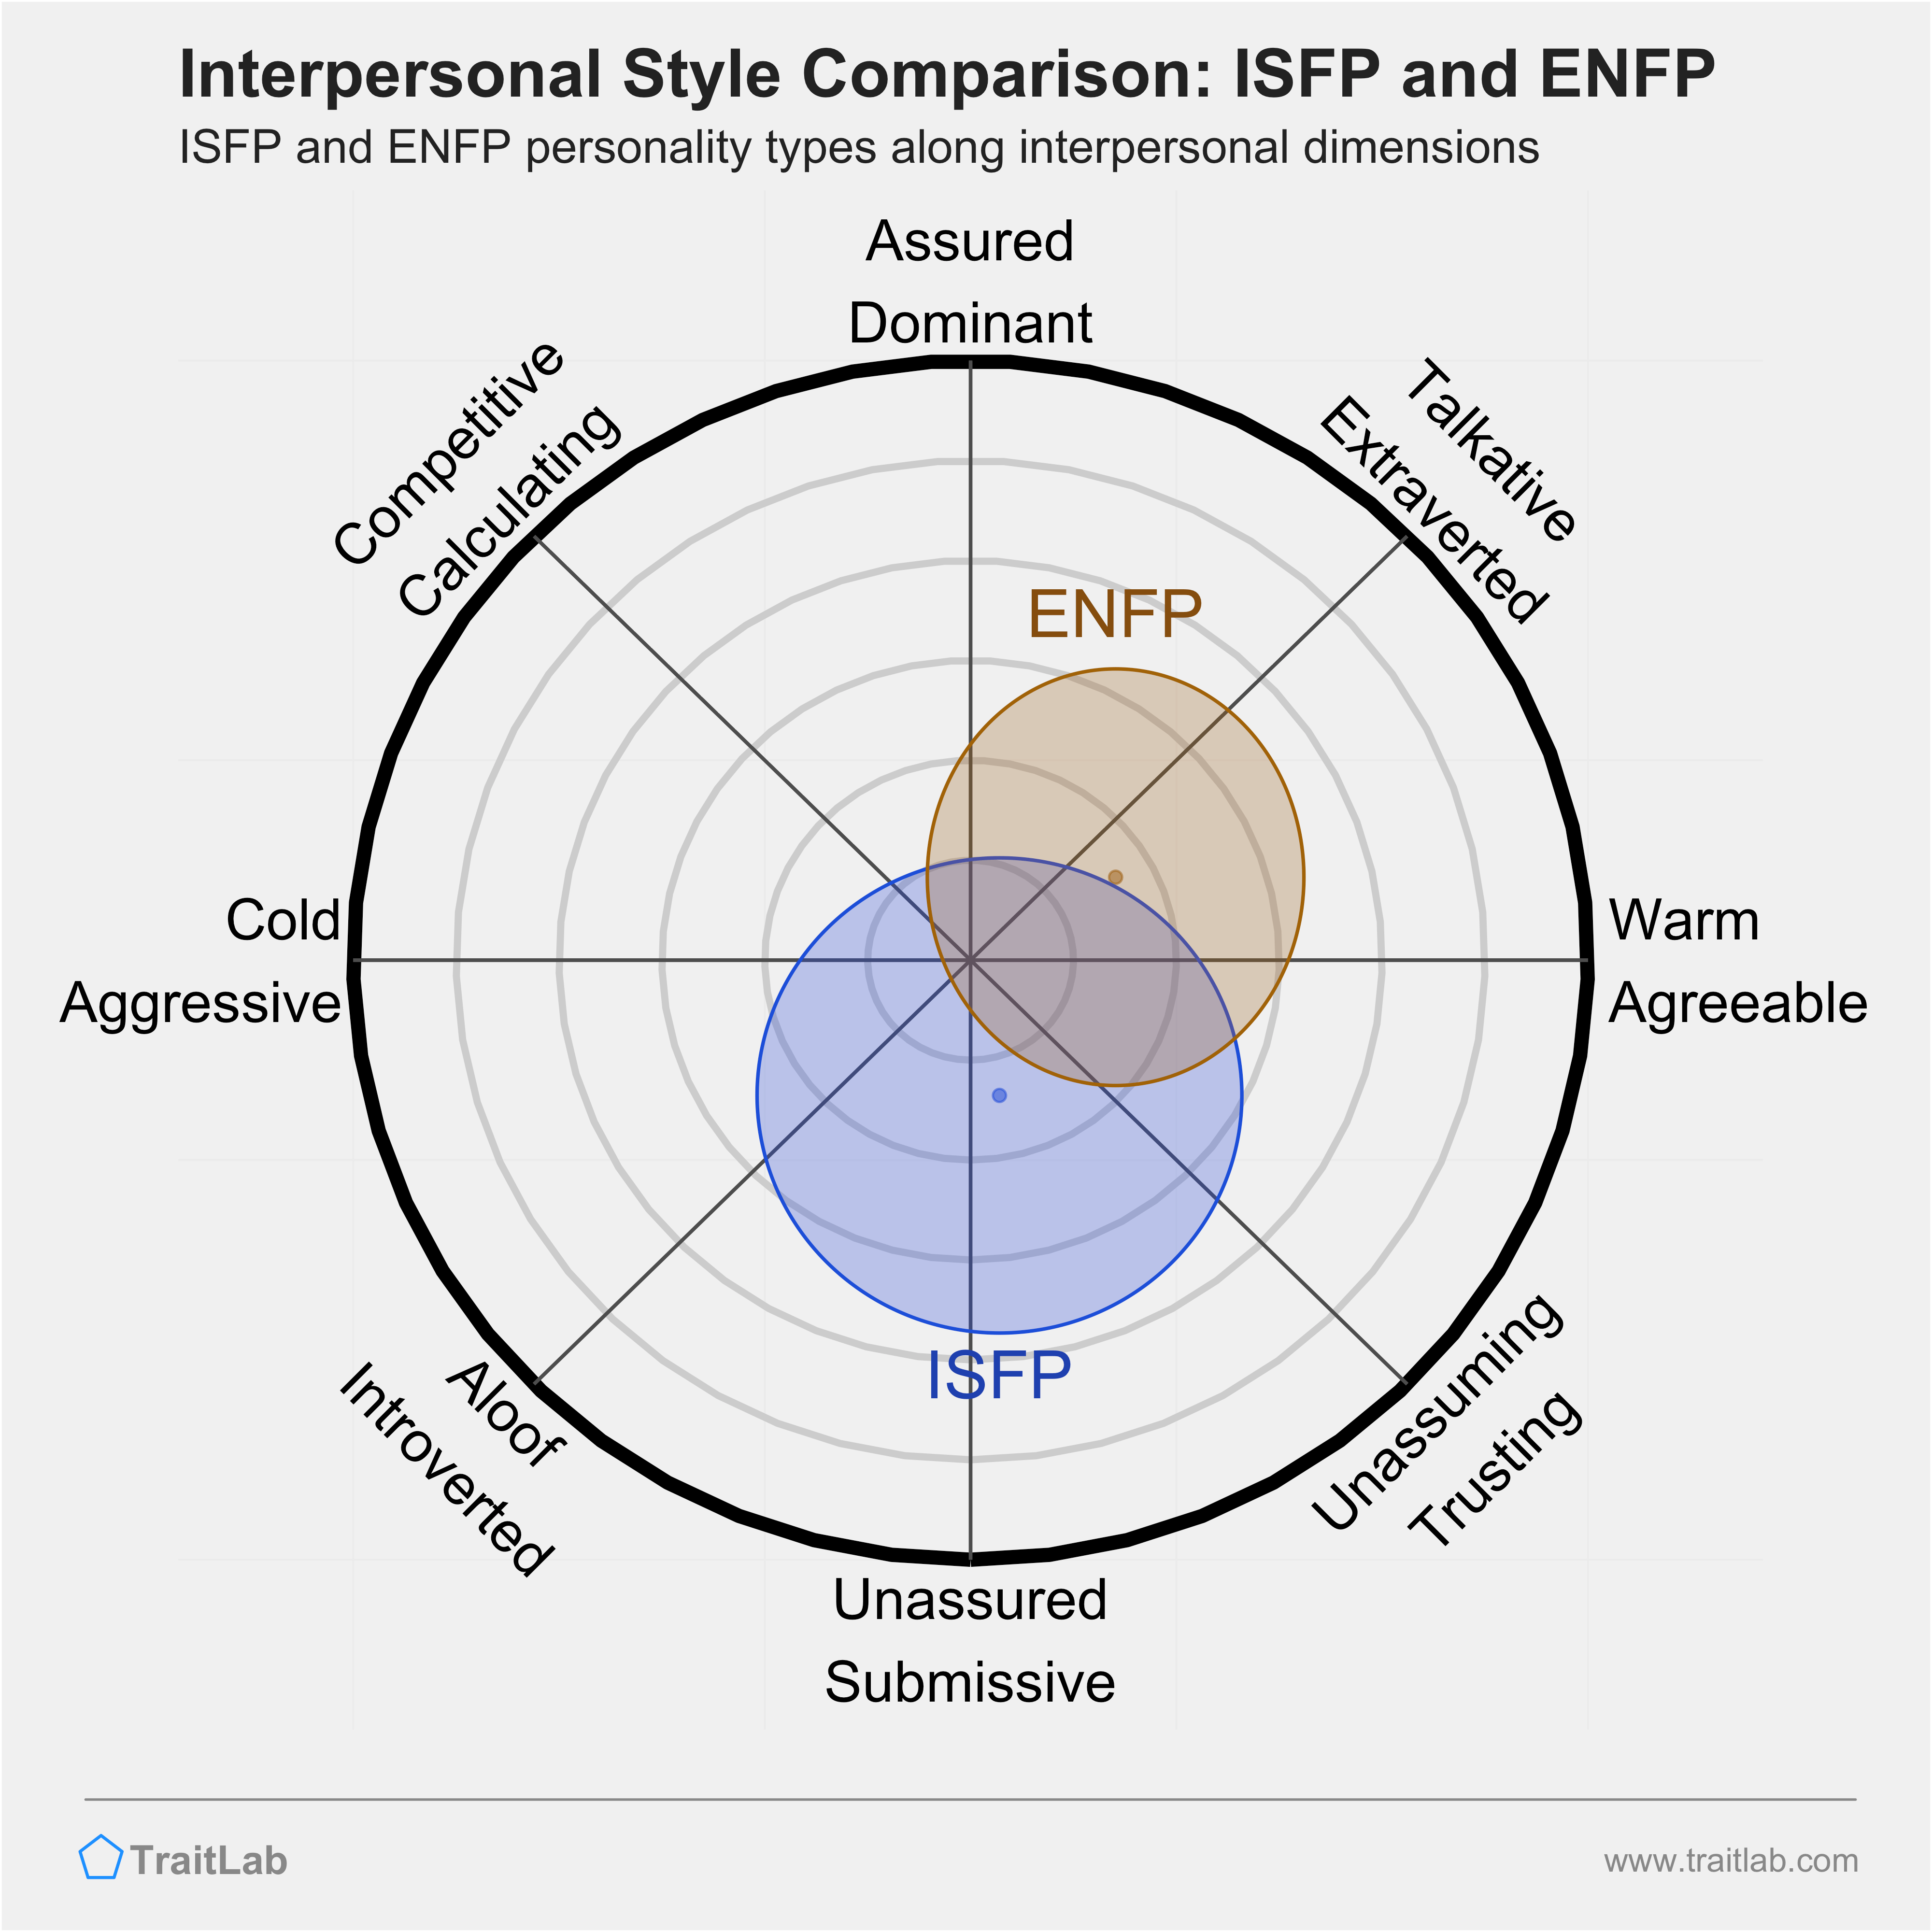 ISFP and ENFP comparison across interpersonal dimensions